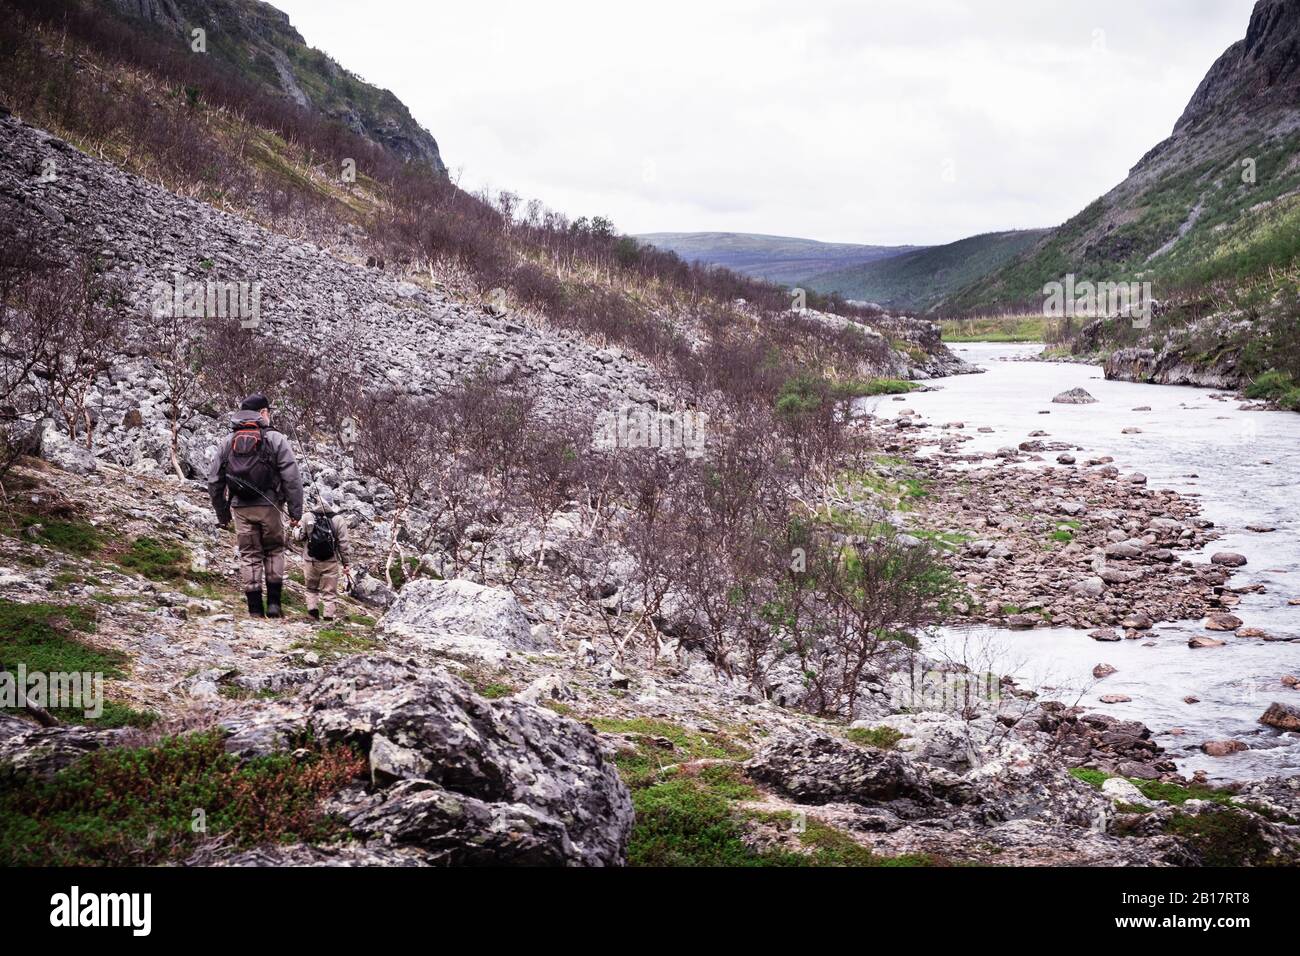 Fly fishermen hiking along river bank with mountains, Lakselv, Norway Stock Photo